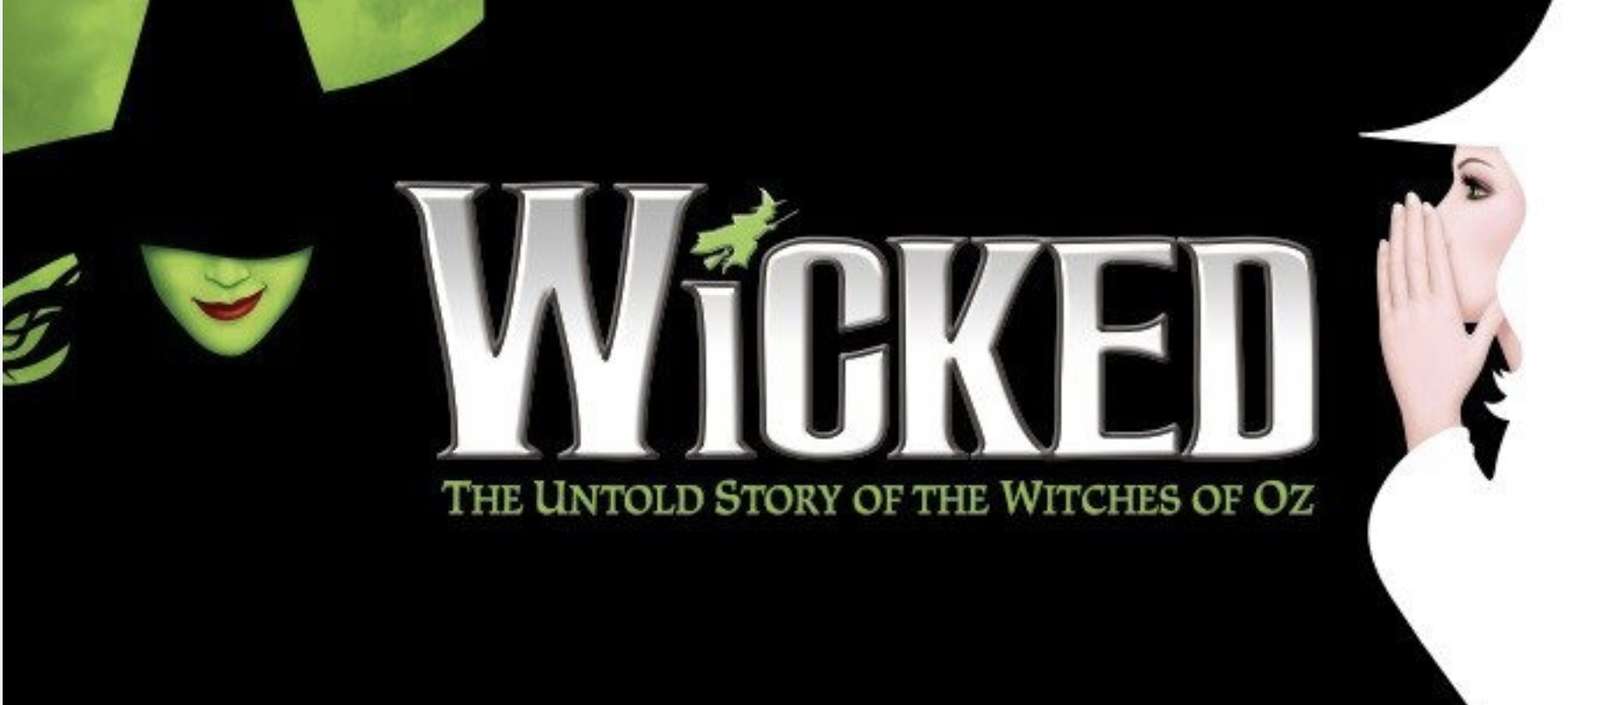 Wicked Theater puzzle online from photo